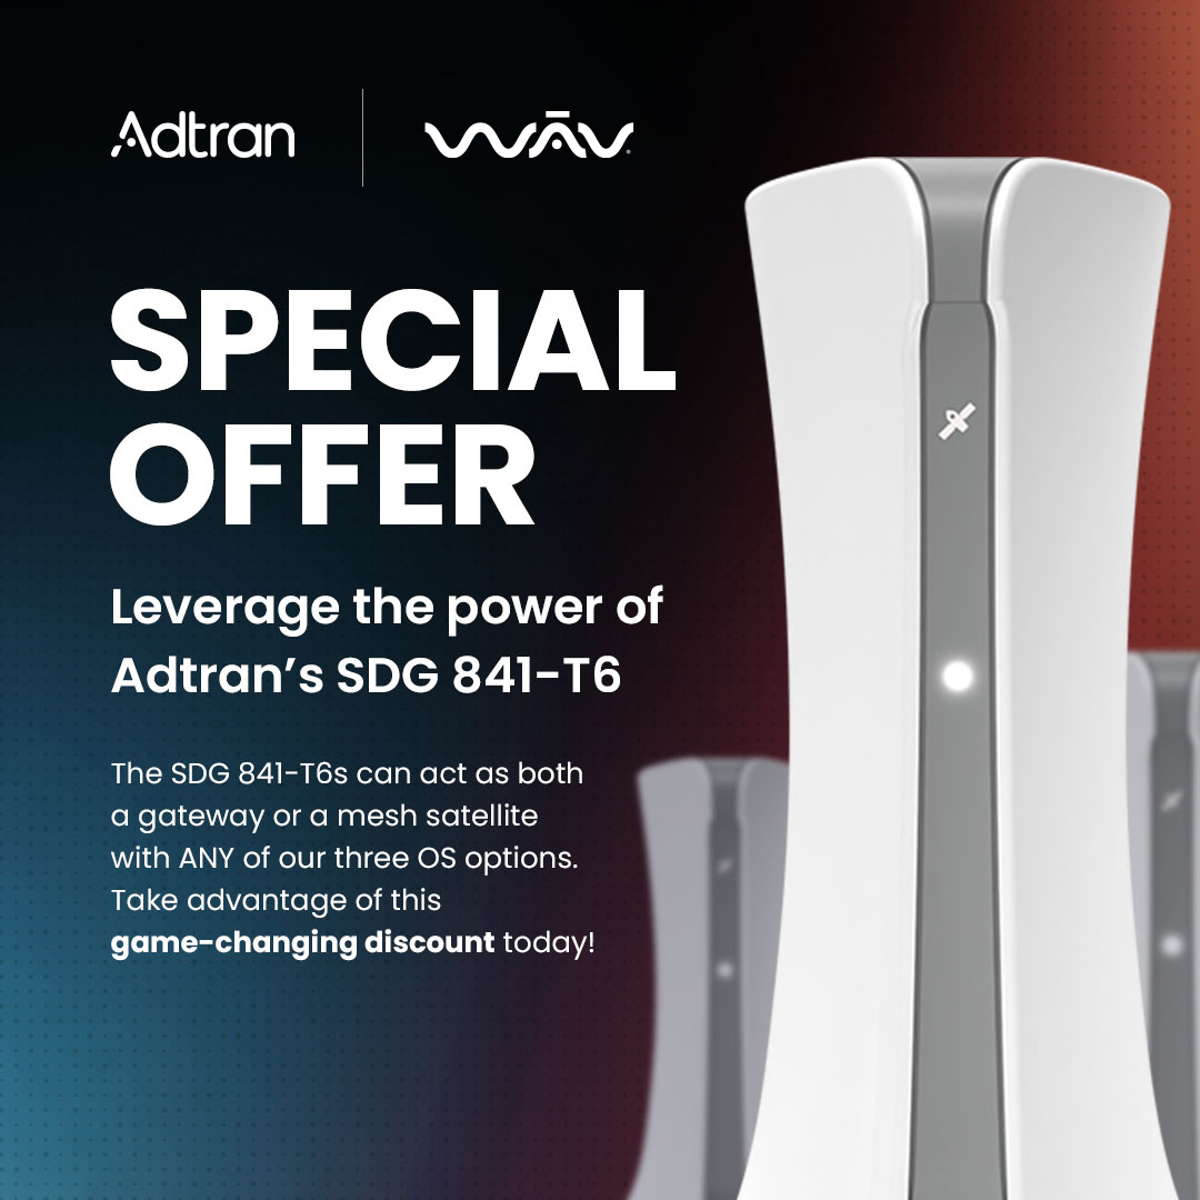 Special offer: Need a full in-home Wi-Fi solution?